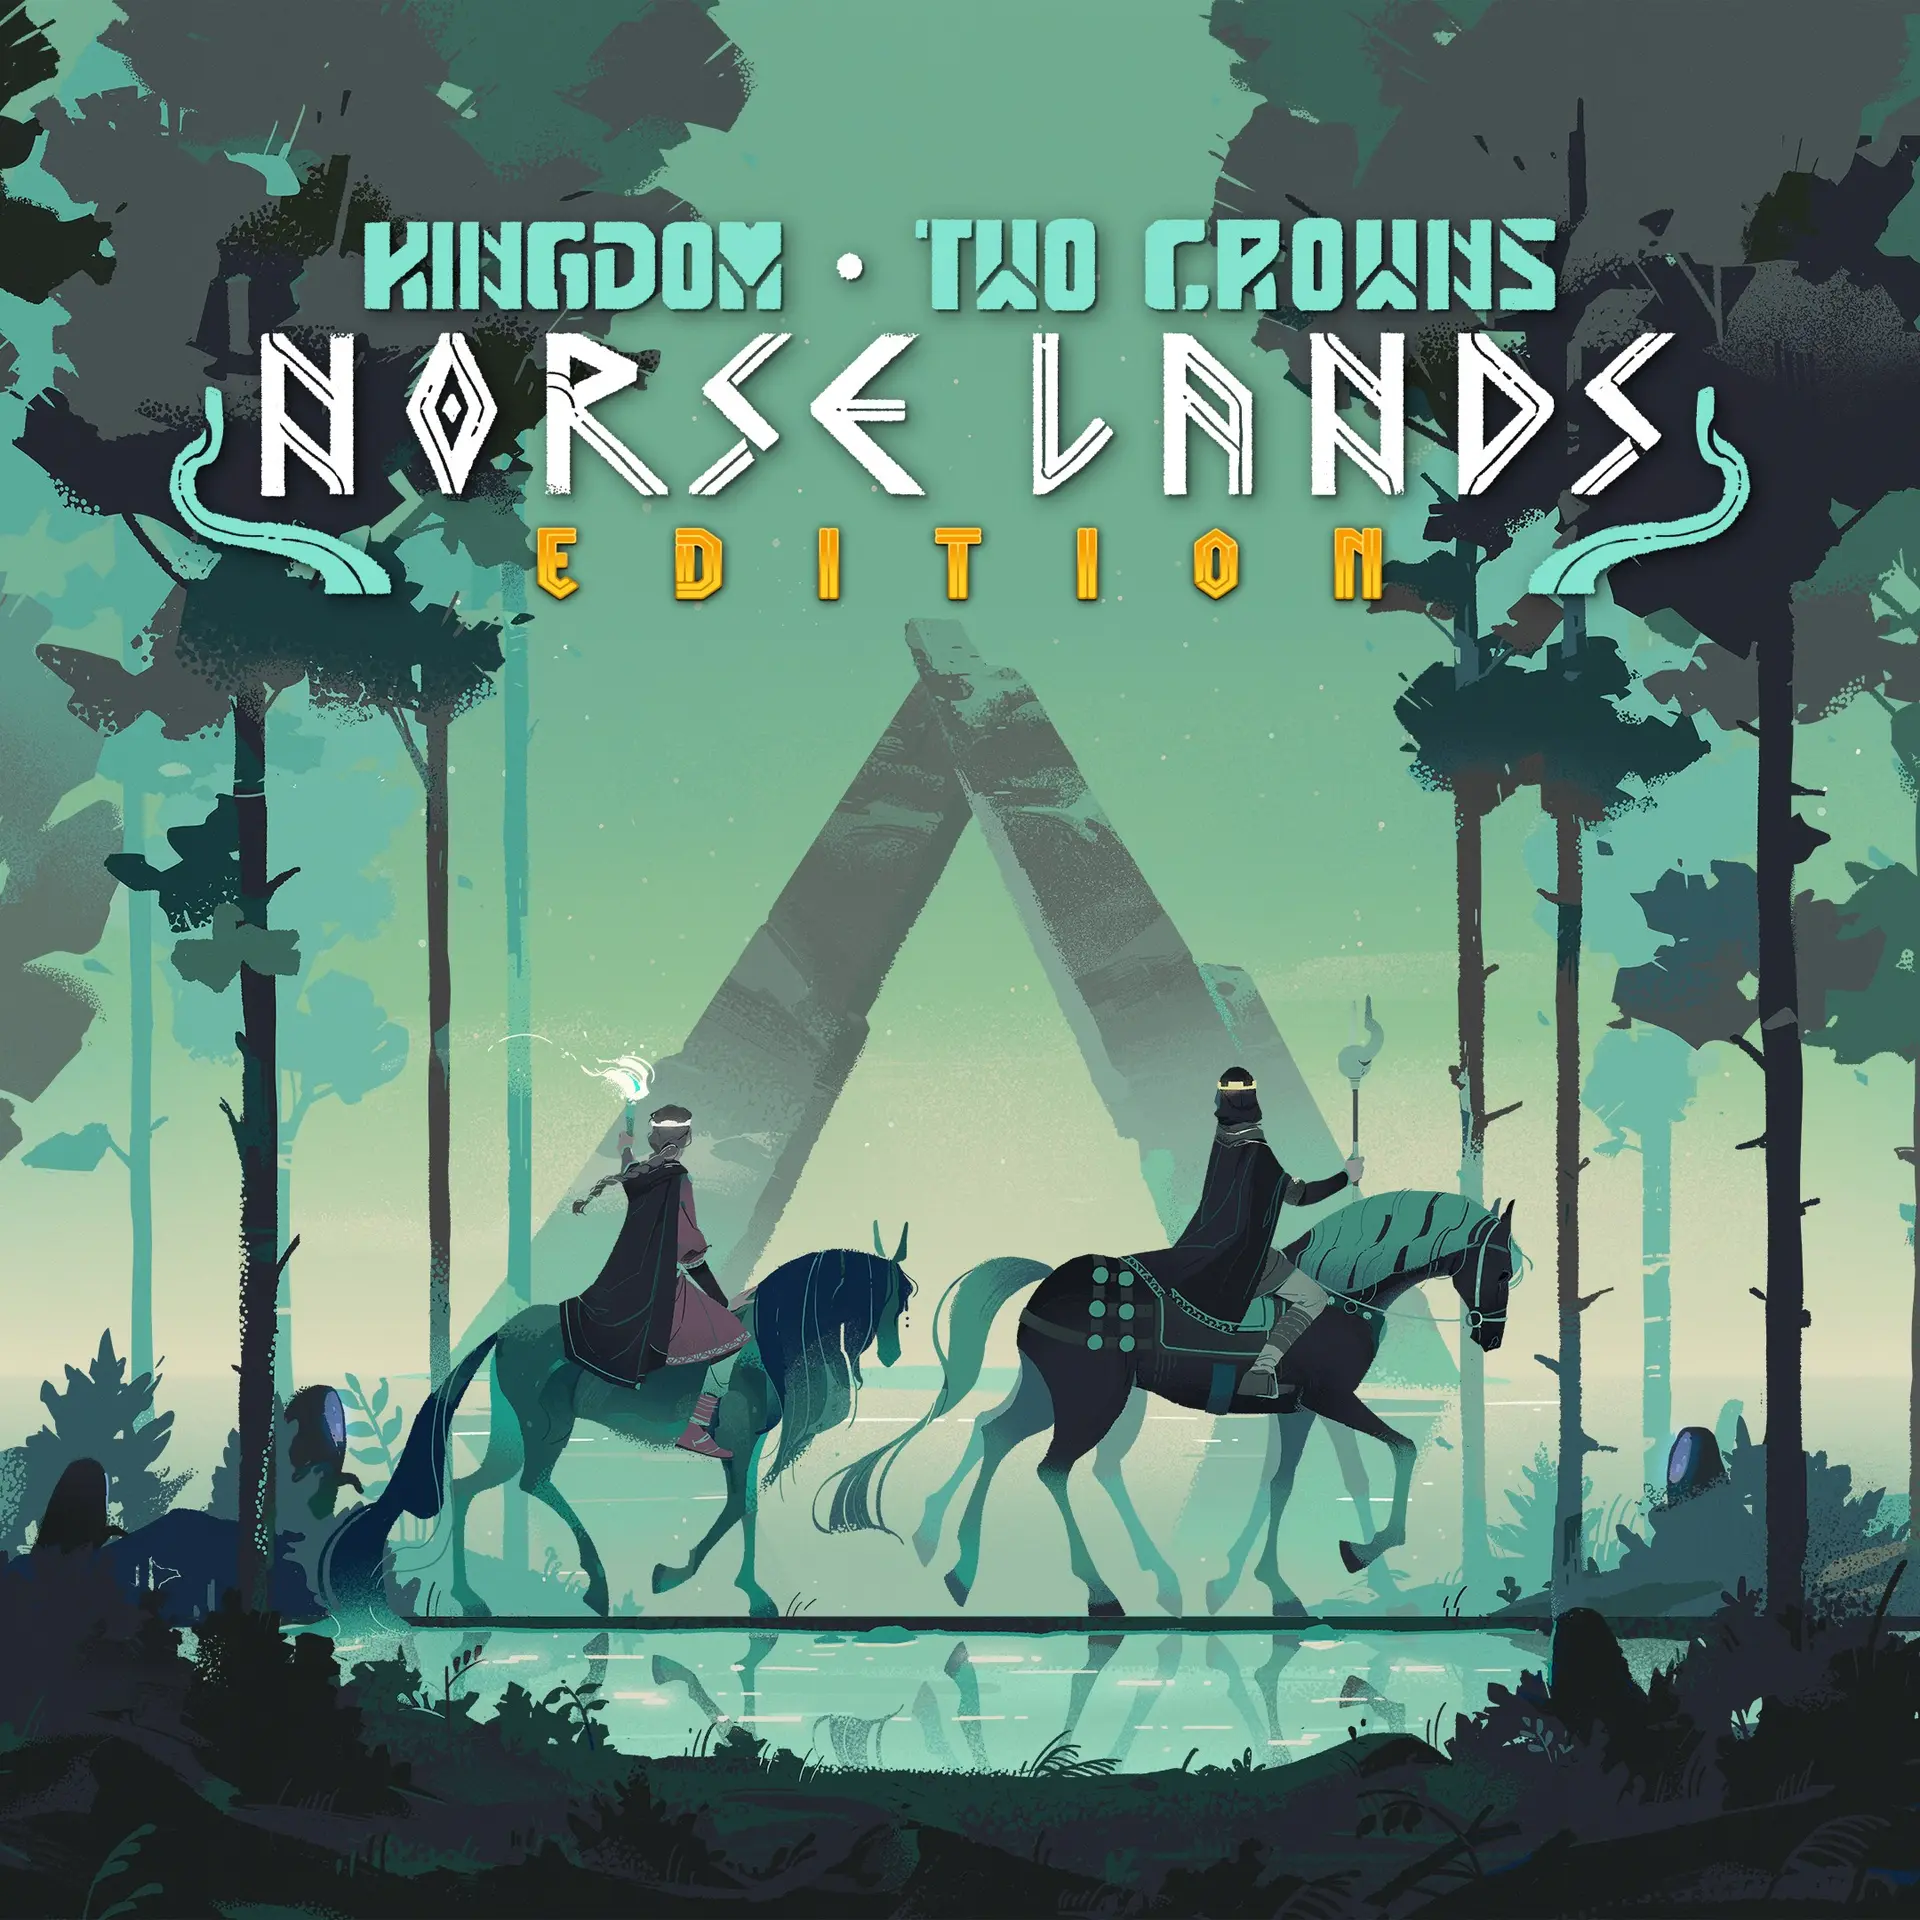 Kingdom Two Crowns: Norse Lands Edition (XBOX One - Cheapest Store)